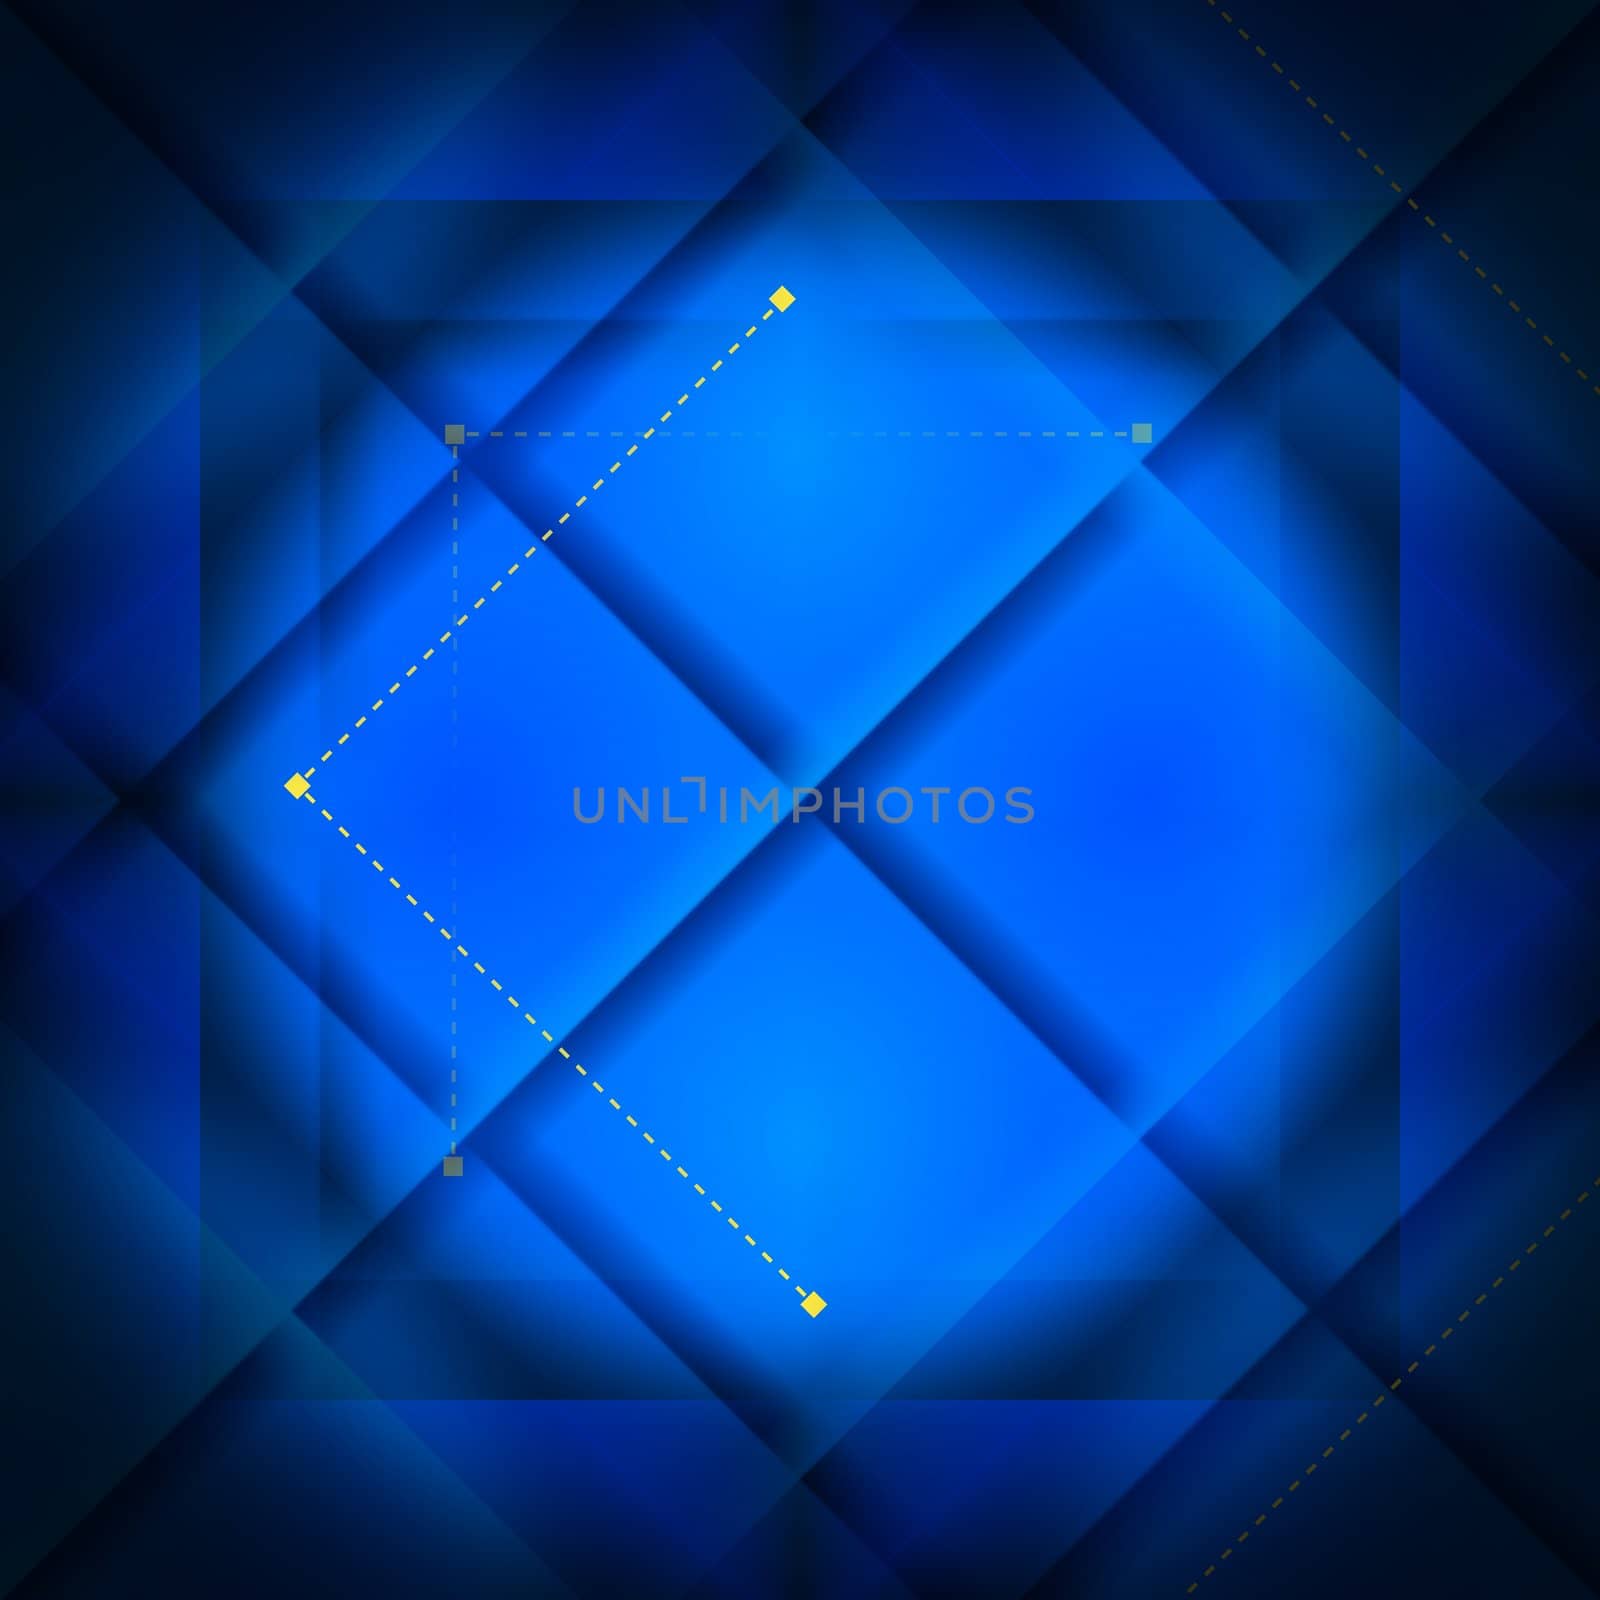 Background with blue large squares and smal yellow